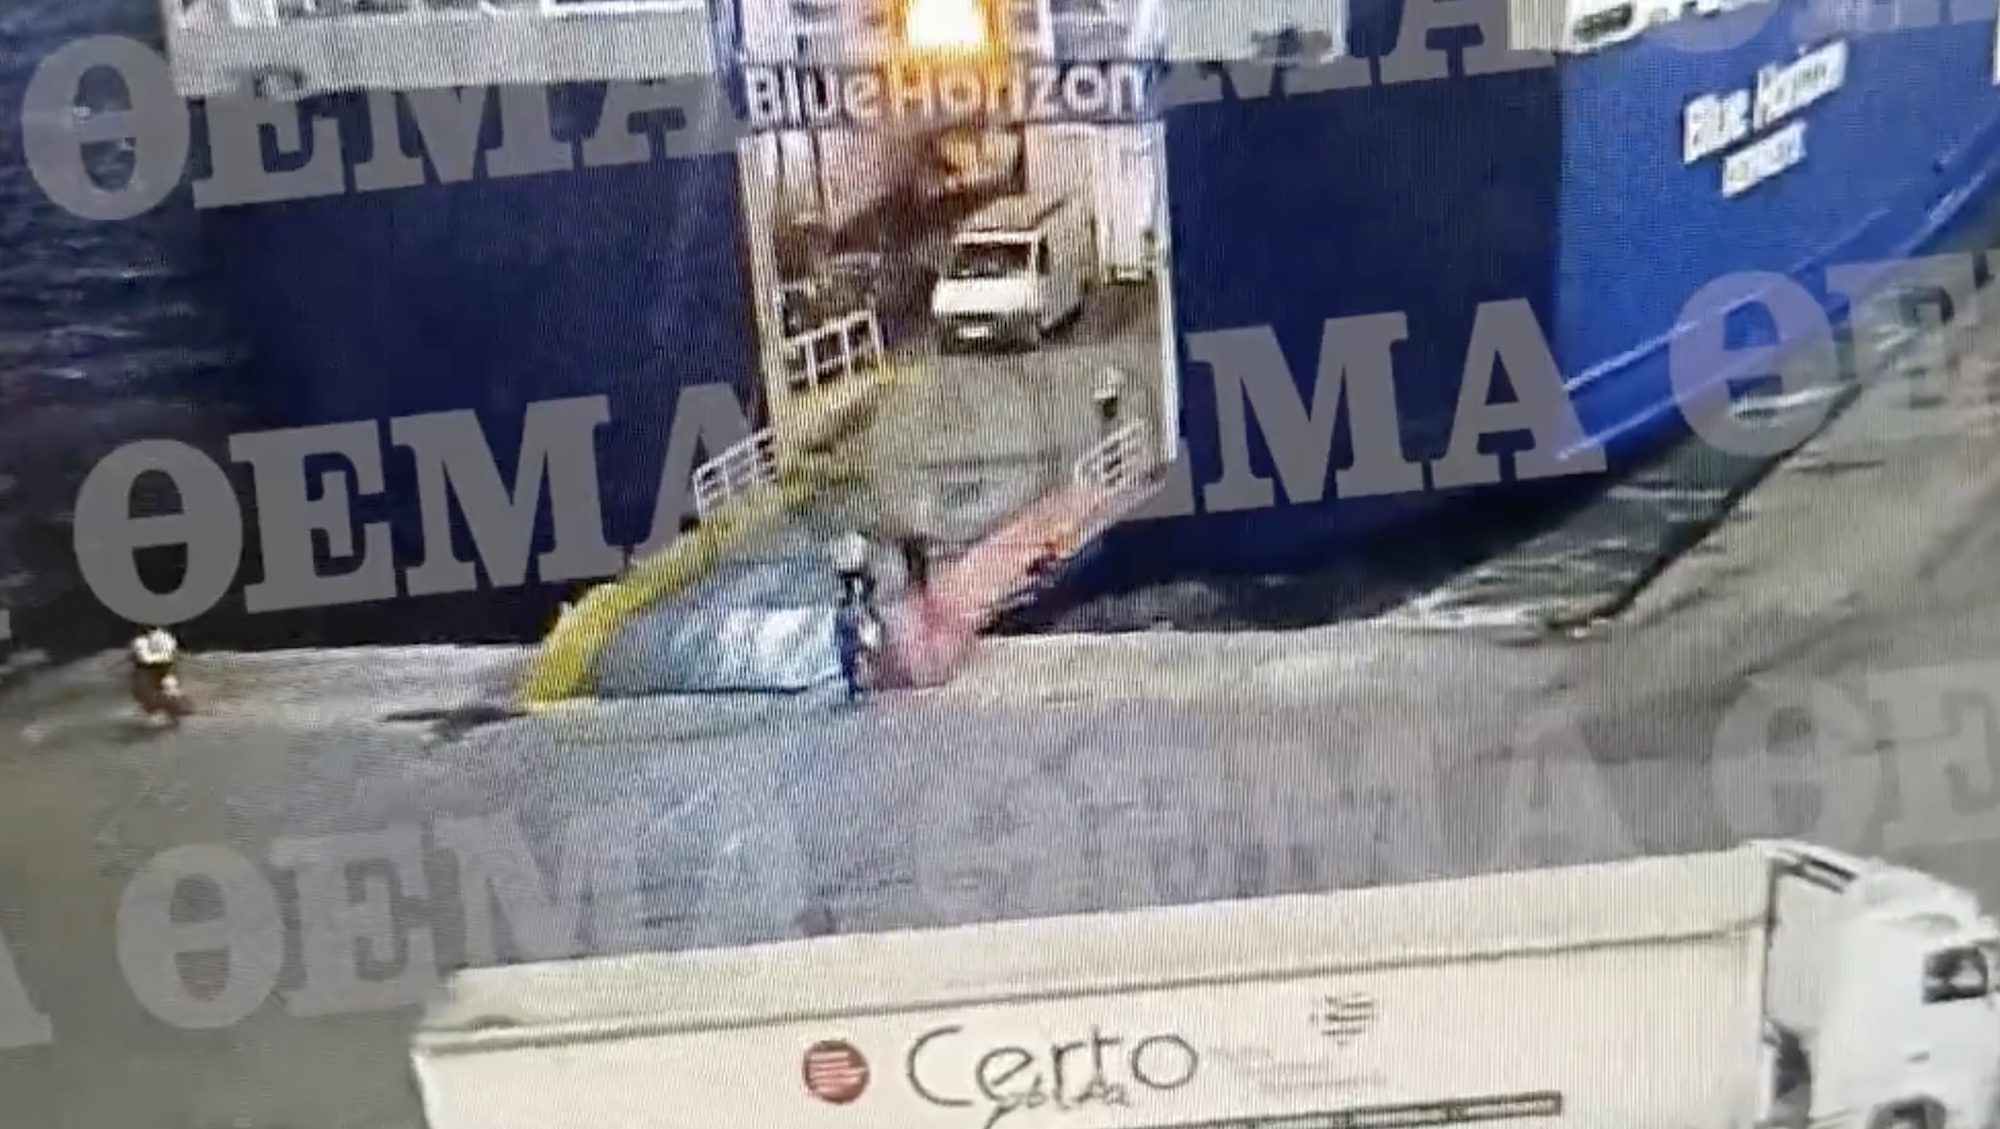 A screengrab of video posted online showing the altercation between a passenger and ferry crew members before the passenger falls into the water.